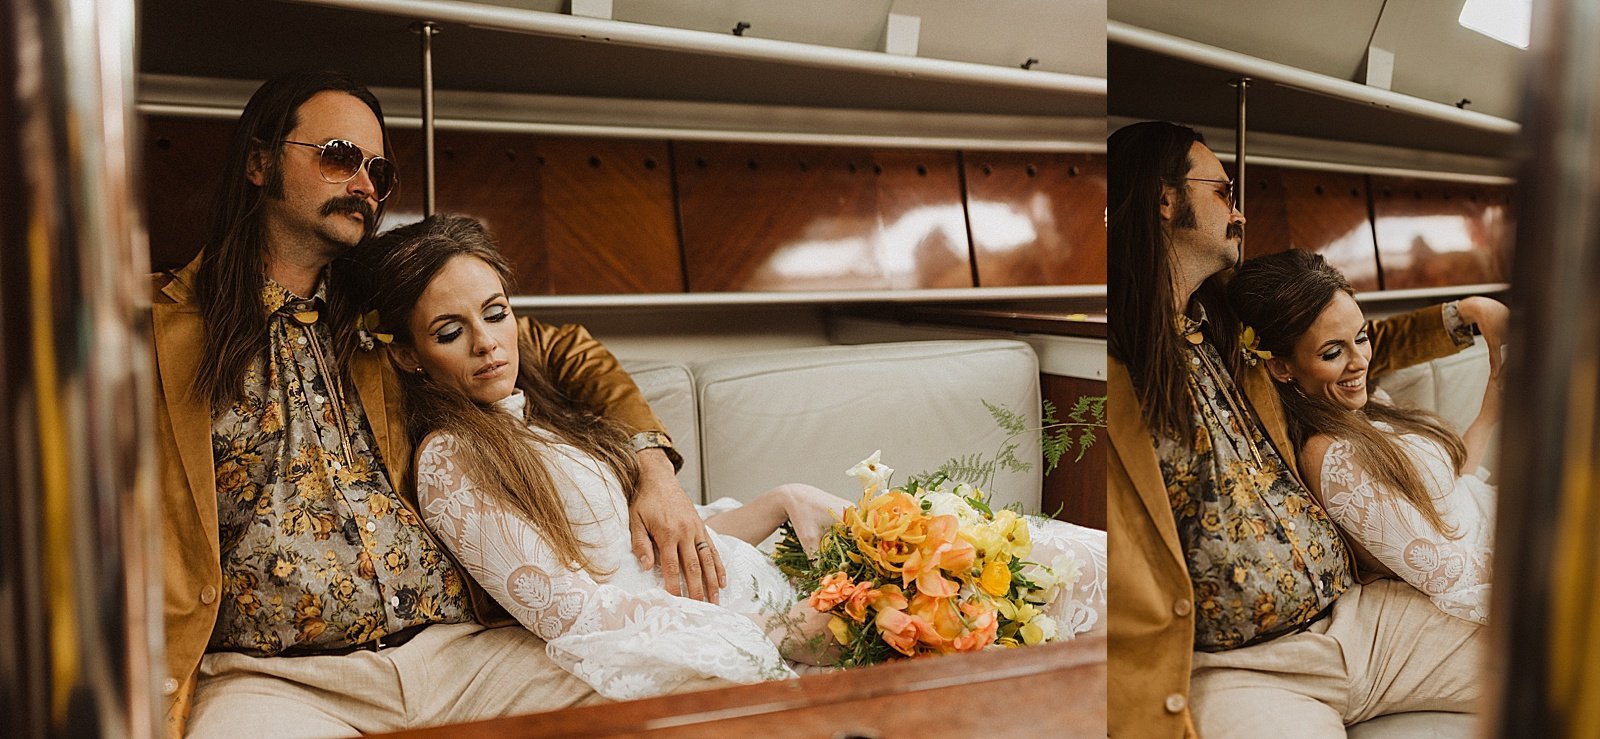  Bride and groom curled up on a boat together by Alaska wedding photographer Theresa McDonald 